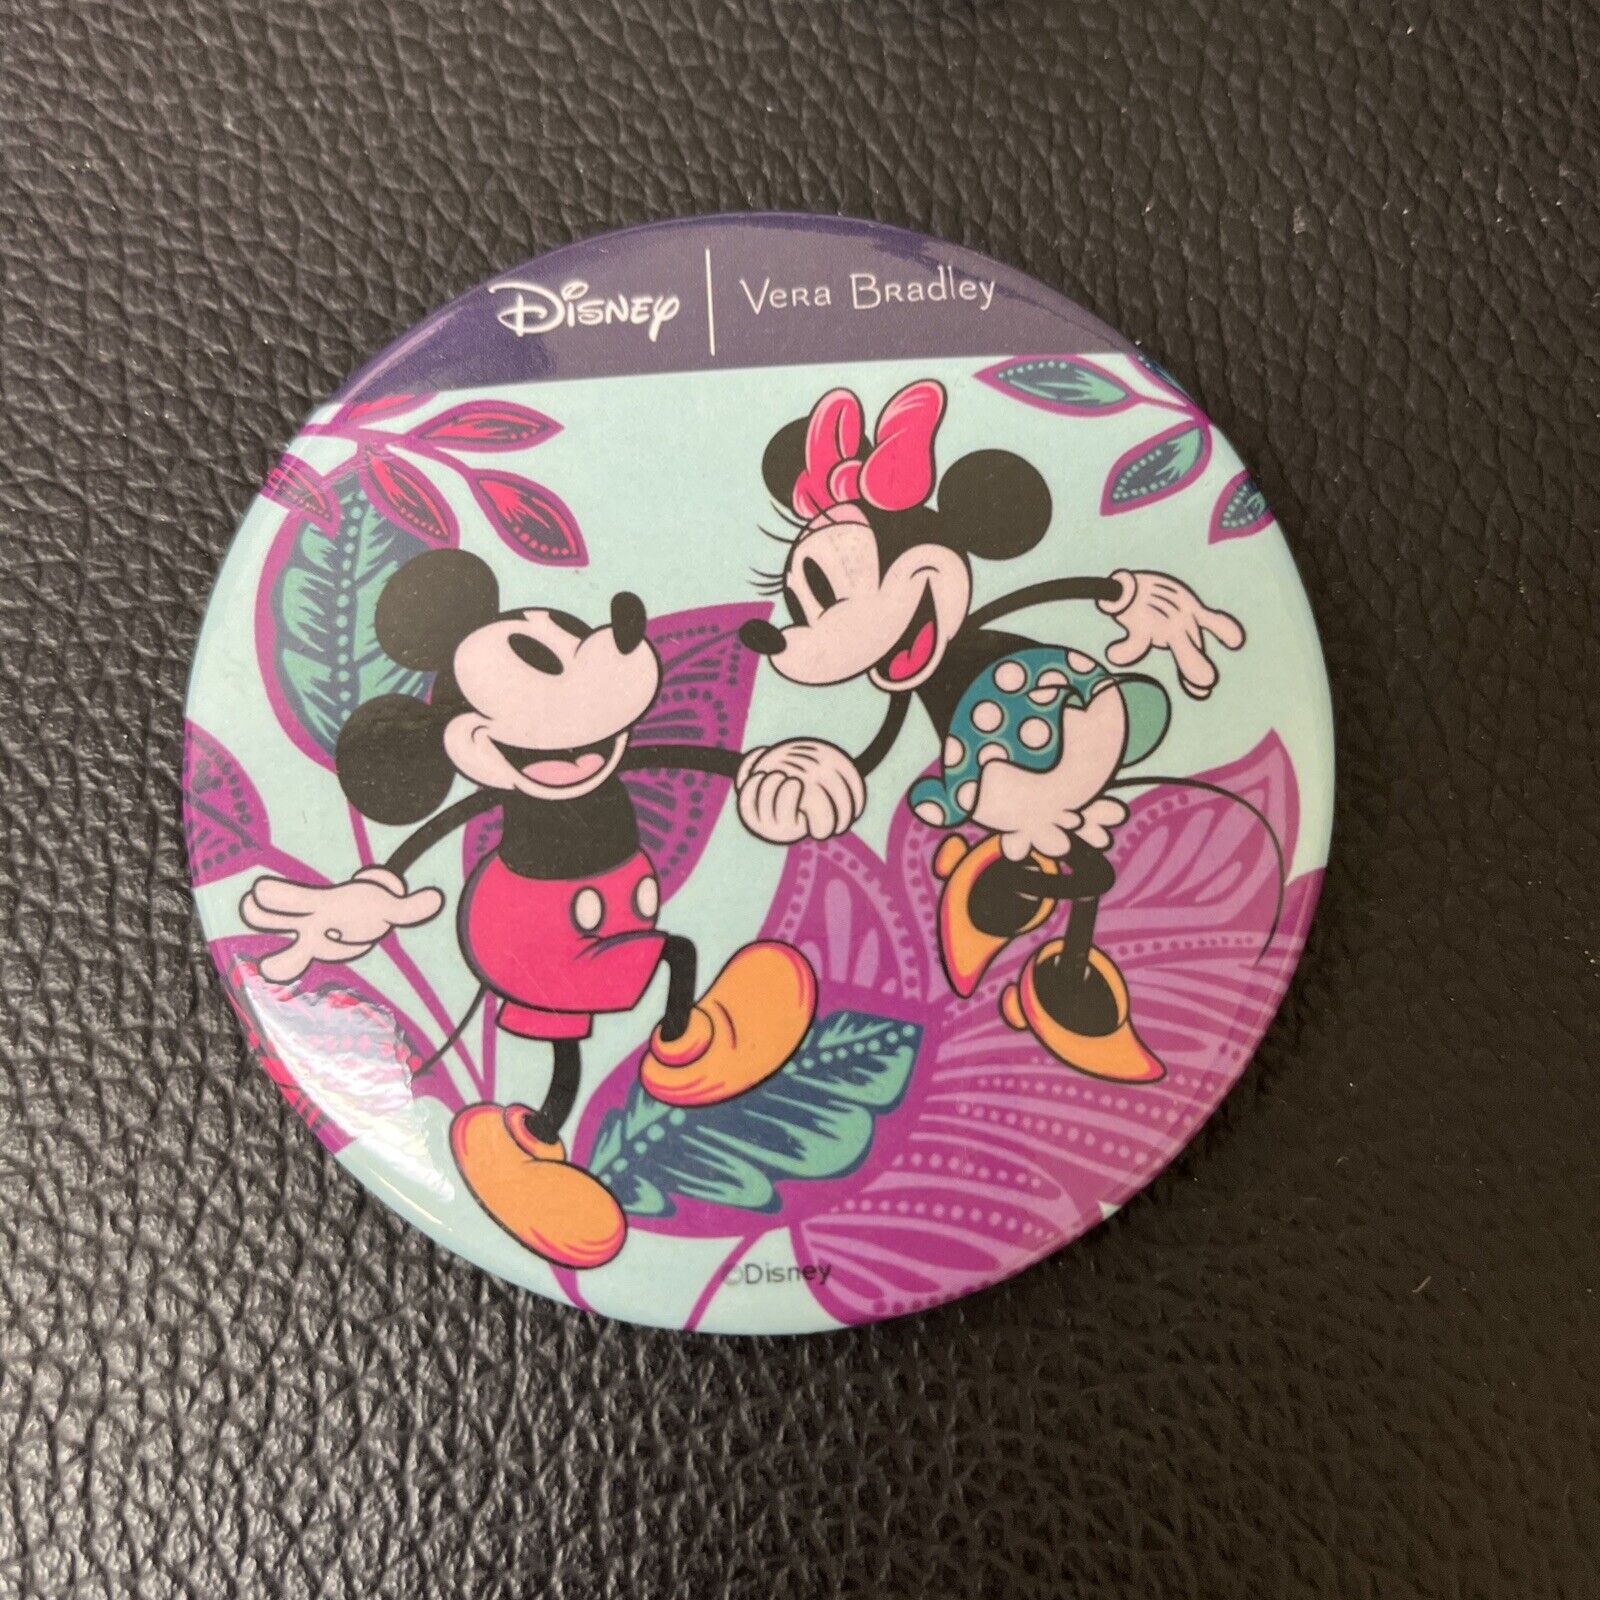 Vera Bradley Disney Mickey and Minnie Mouse Flirty Floral Launch Pin Button NEW